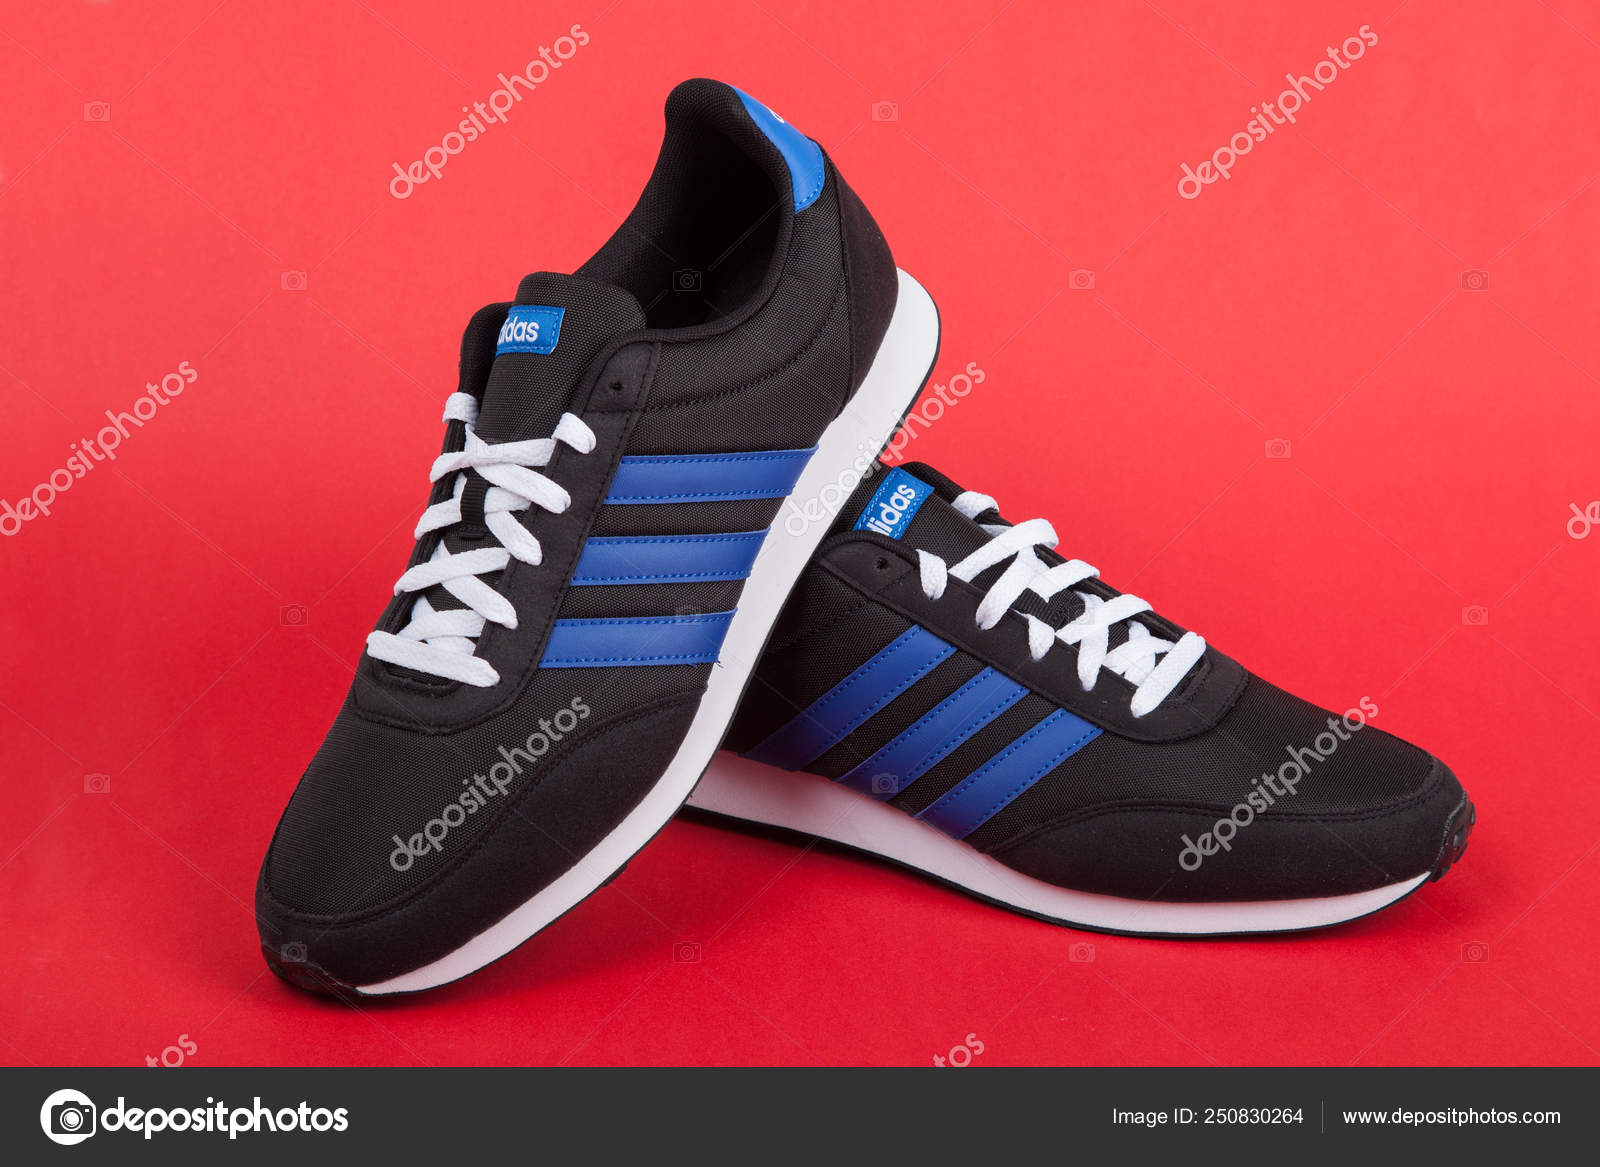 Varna , Bulgaria - JULY 4, 2018 : ADIDAS V RACER sport shoes on red  background.. Product shot. Adidas